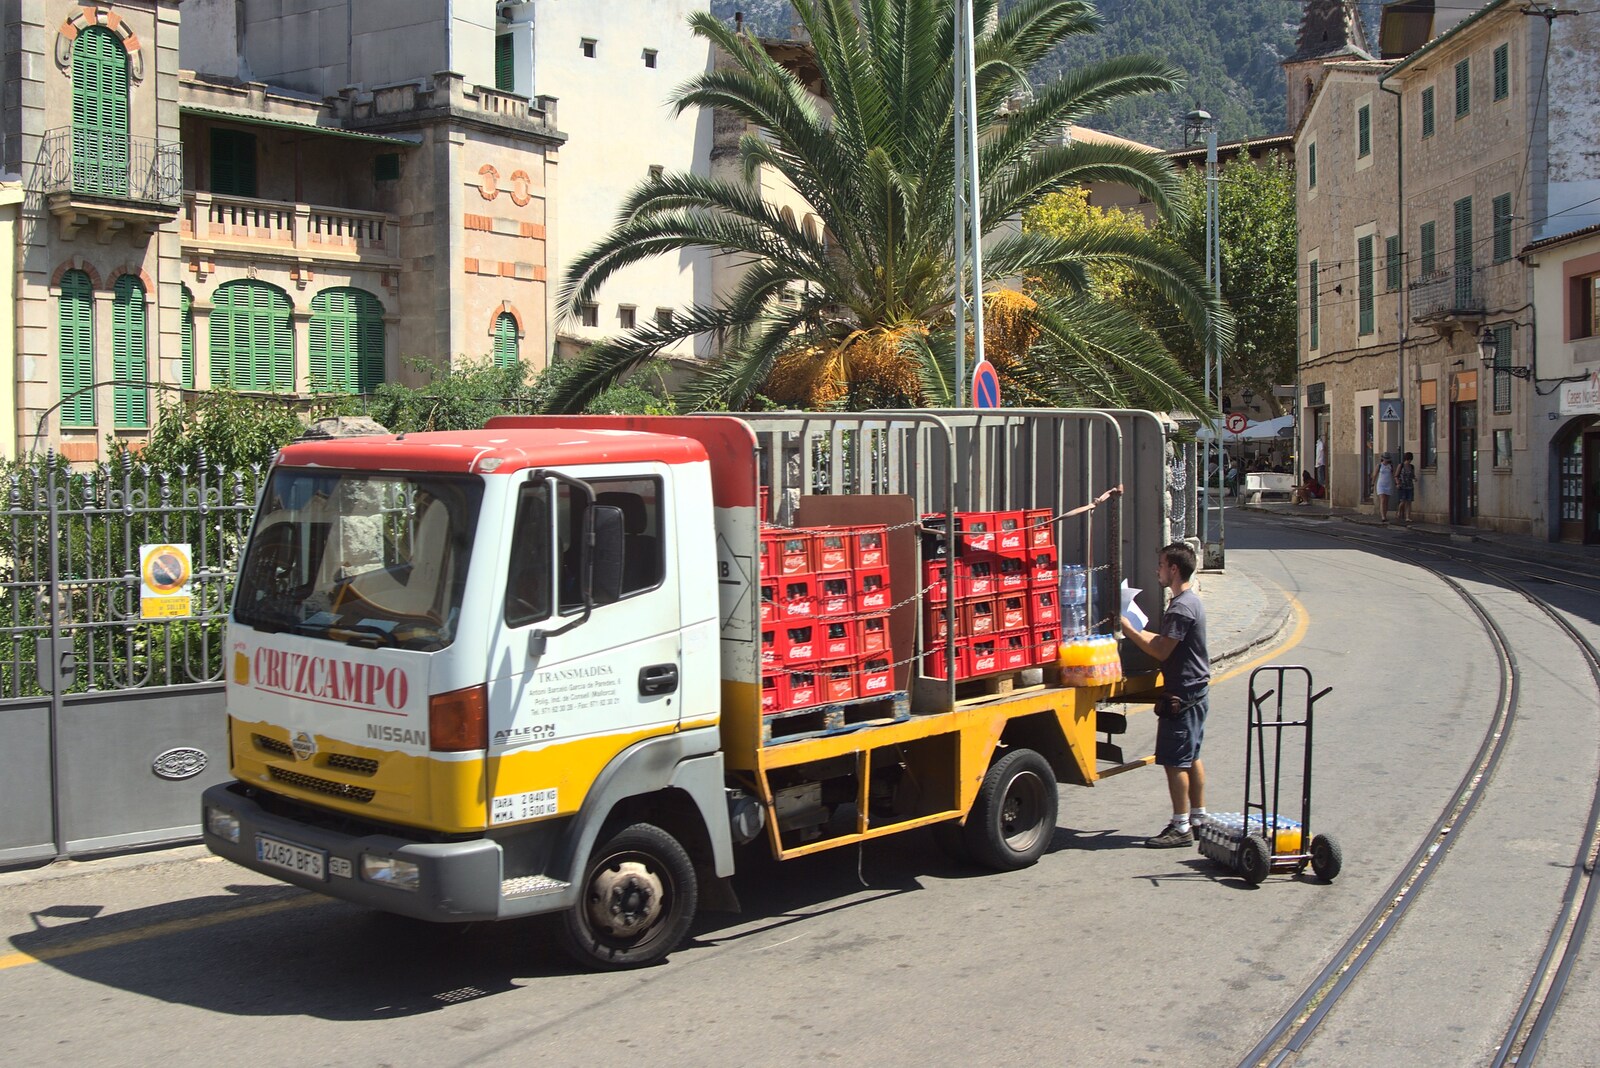 An essential Cruzcampo delivery from A Tram Trip to Port Soller, Mallorca - 18th August 2011